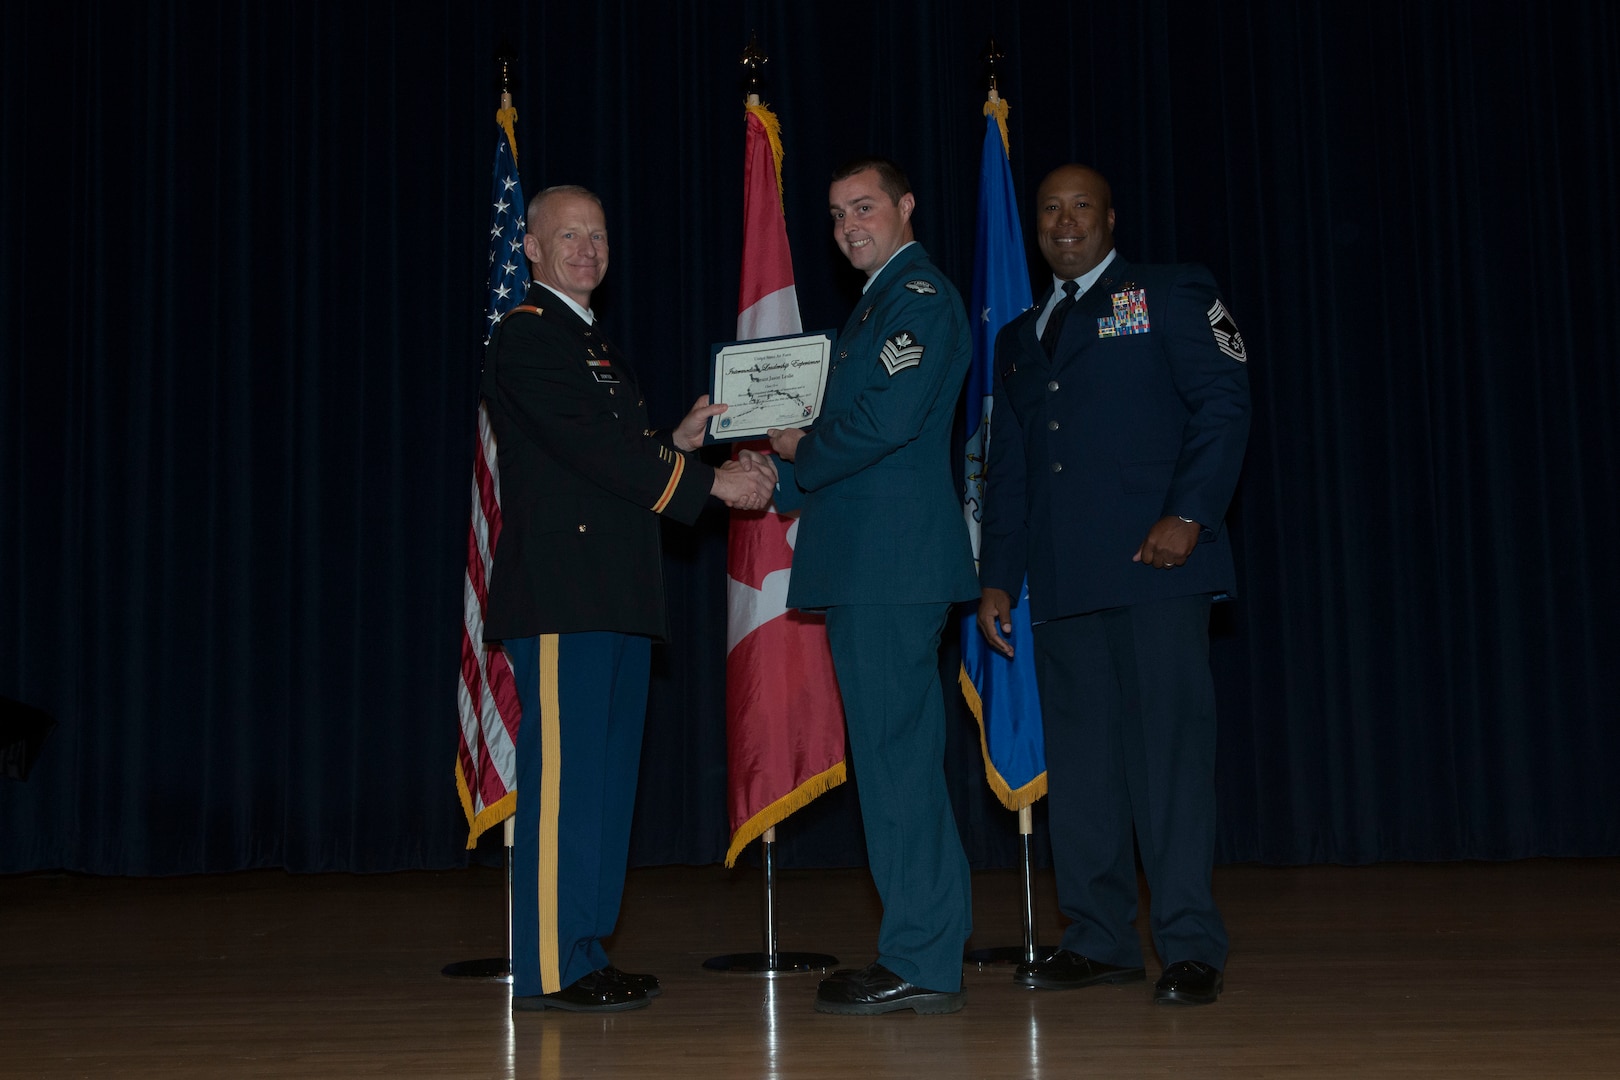 Sgt Jason Leslie (center) receives his Non-Commissioned Officer Academy certificate at Elmendorf Professional Military Education Center at Joint Base Elmendorf-Richardson in Alaska.